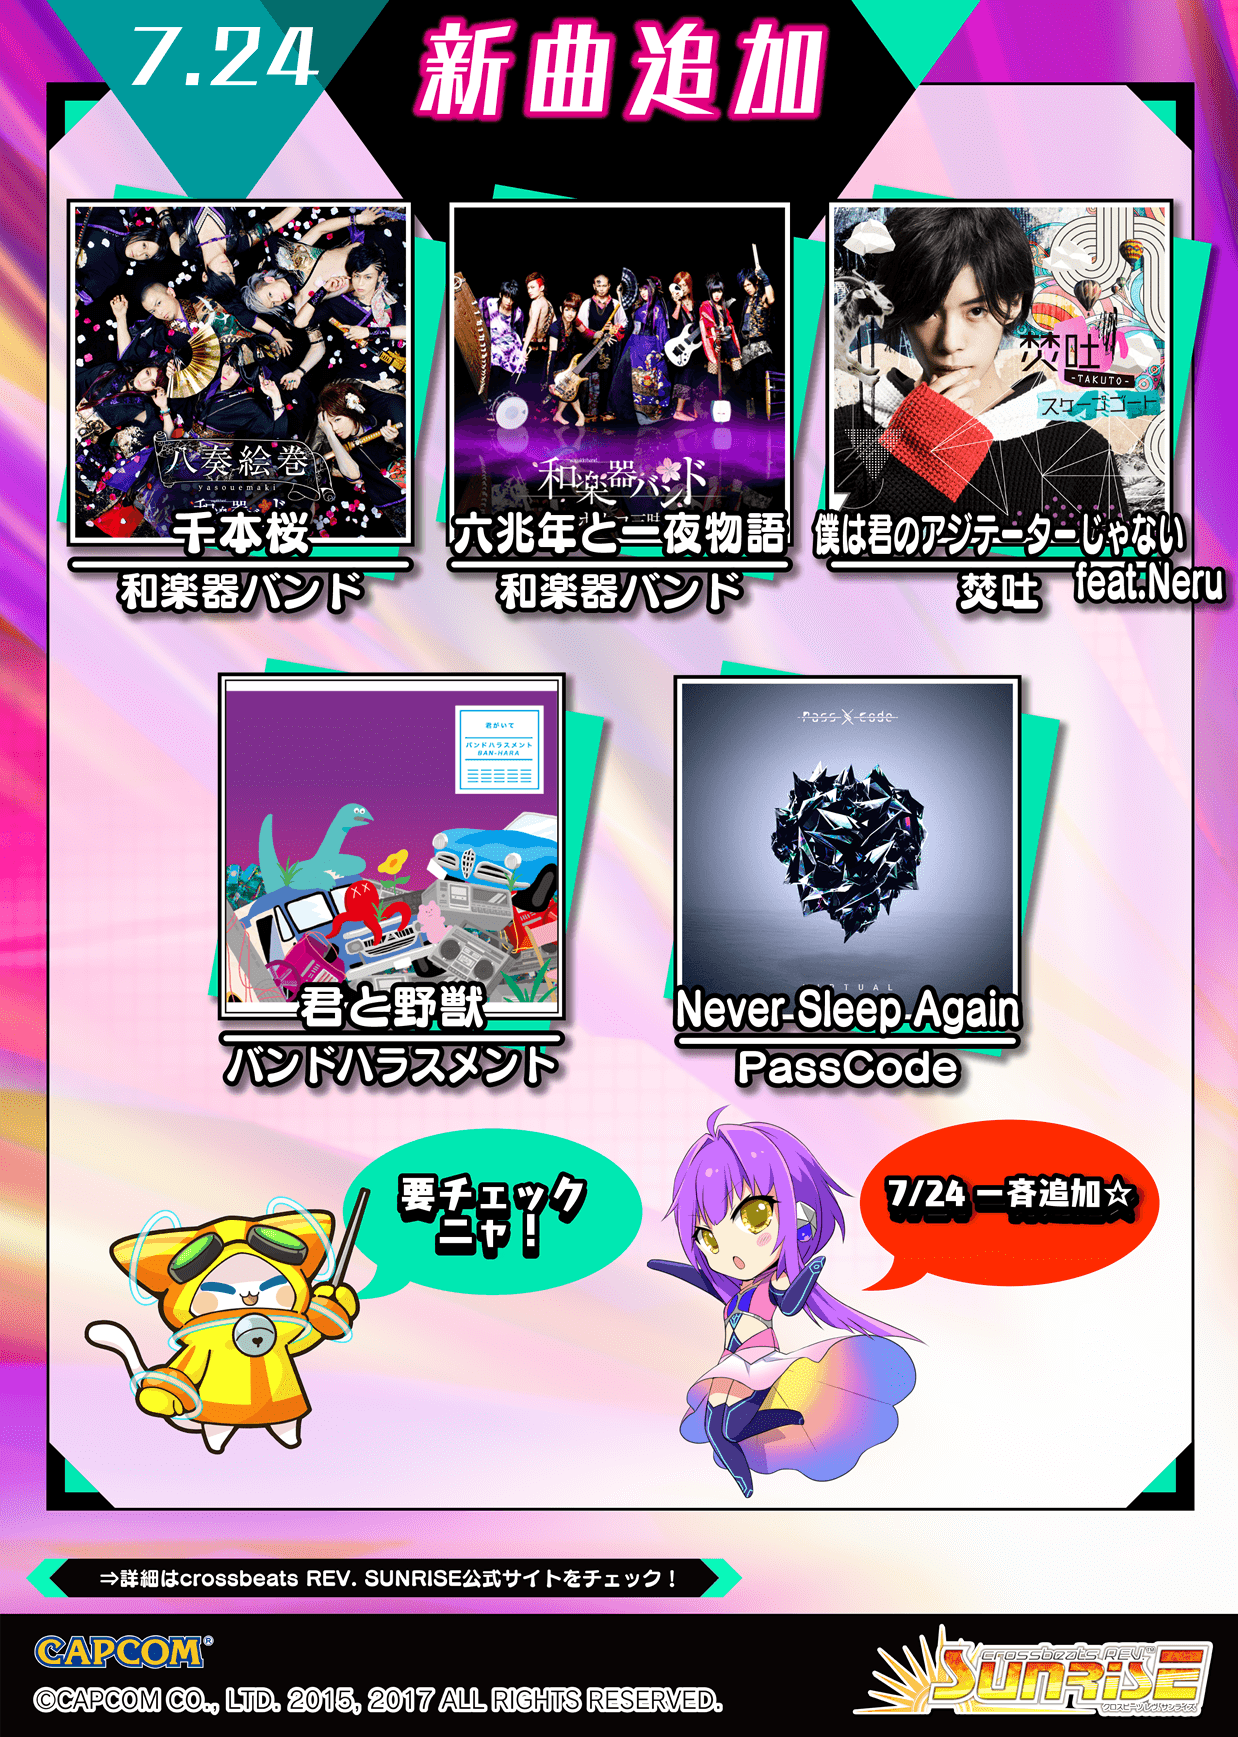 event_banner_news_newsong_0724.png